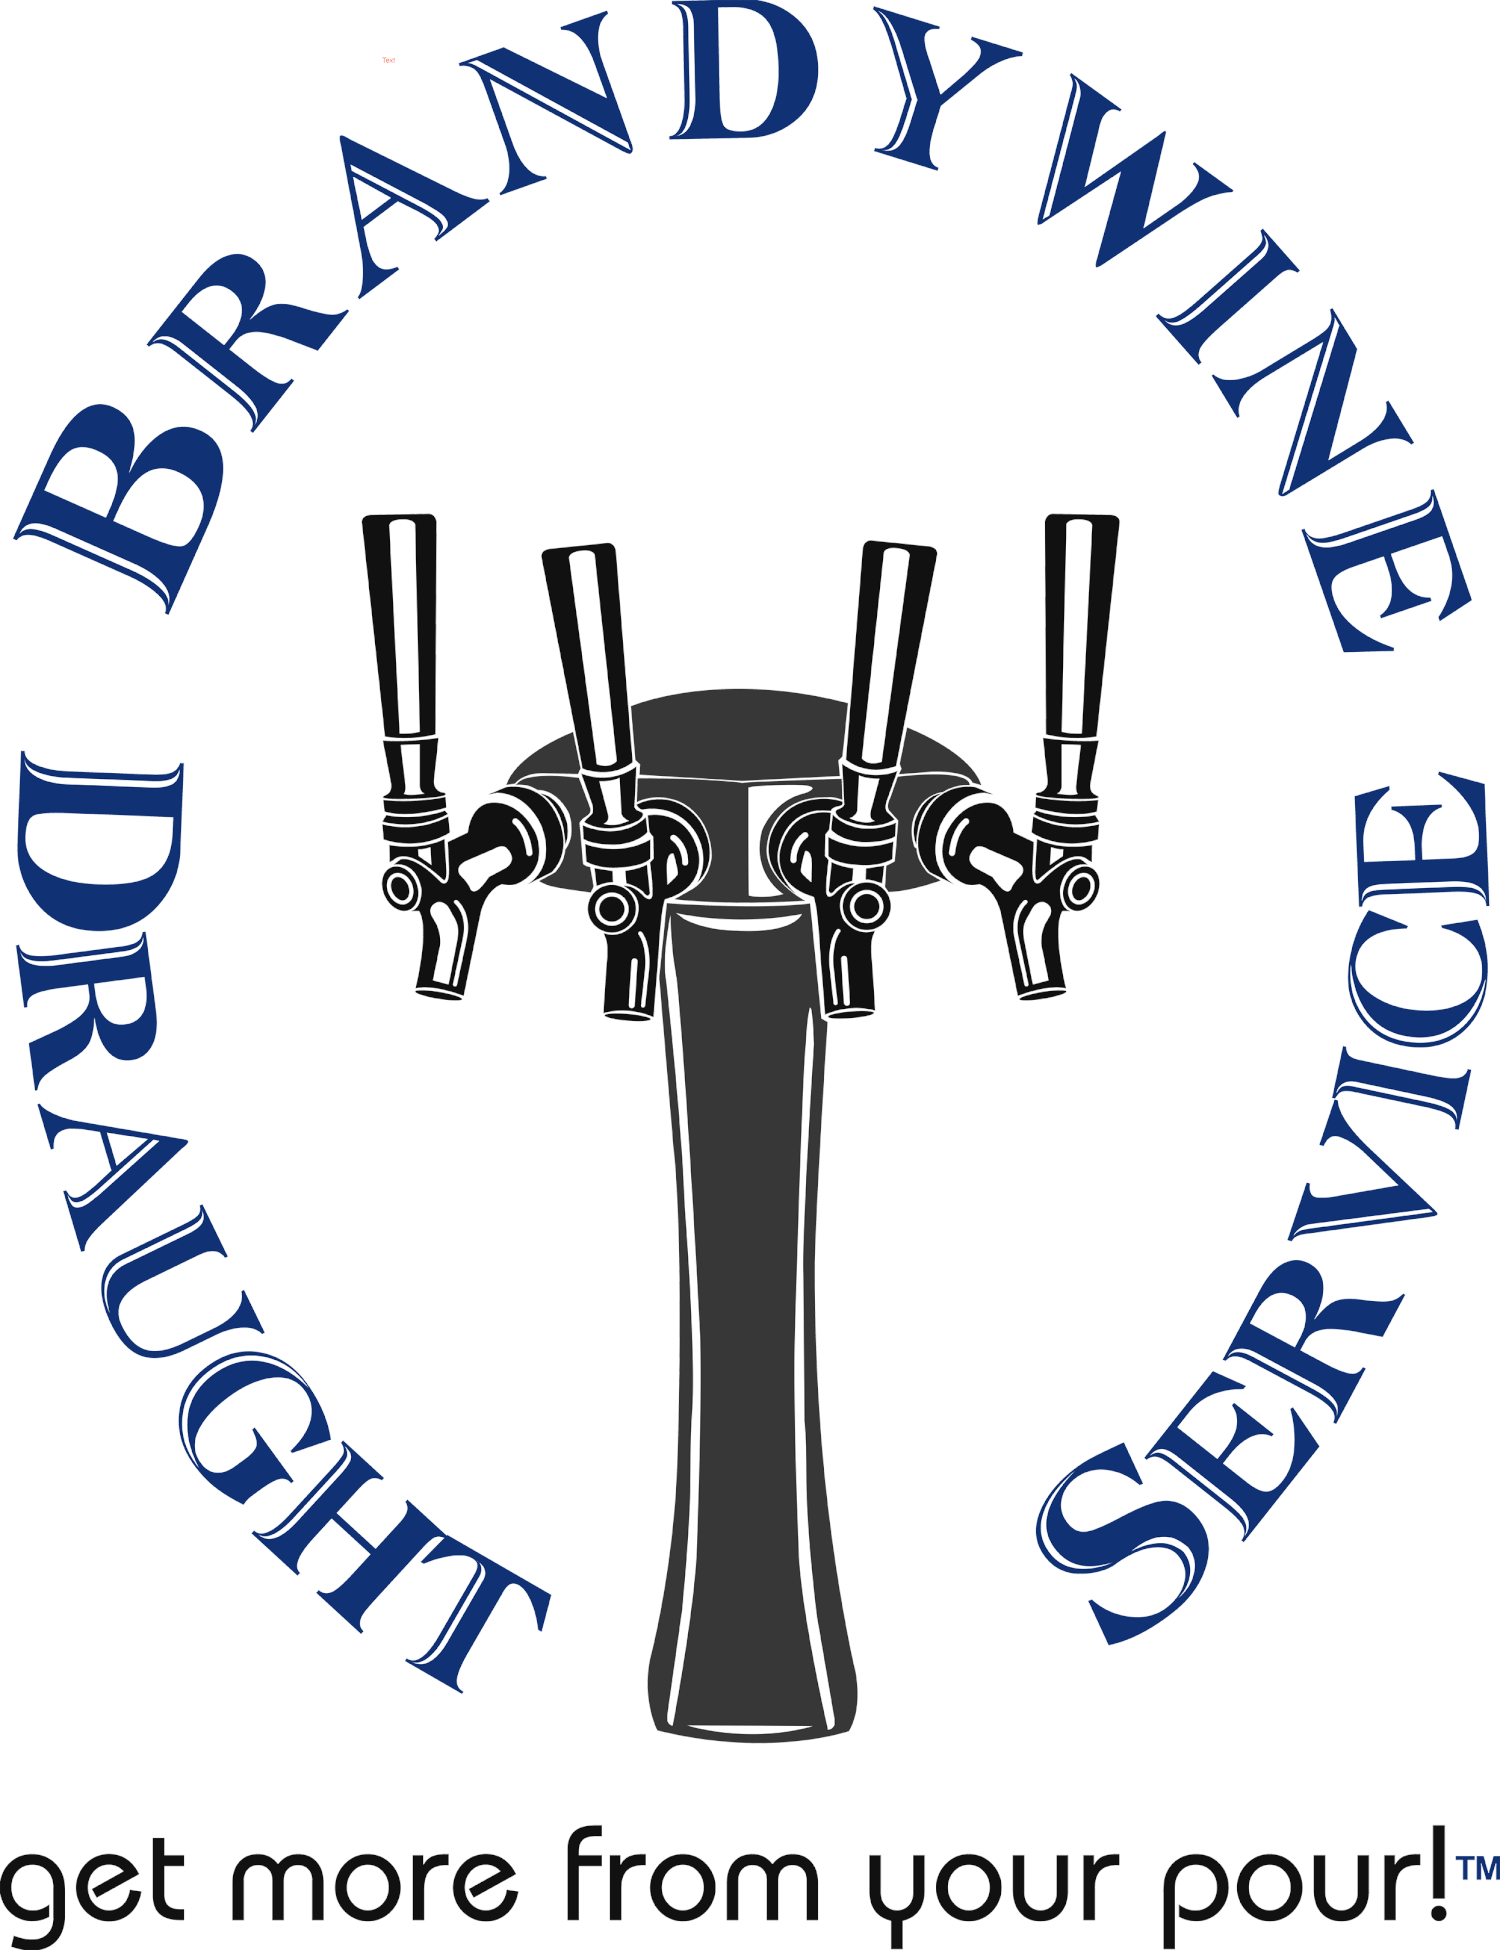 Brandywine Draught Service - draught beer equipment and liquor dispensing equipment services in Greater Philadelphia PA